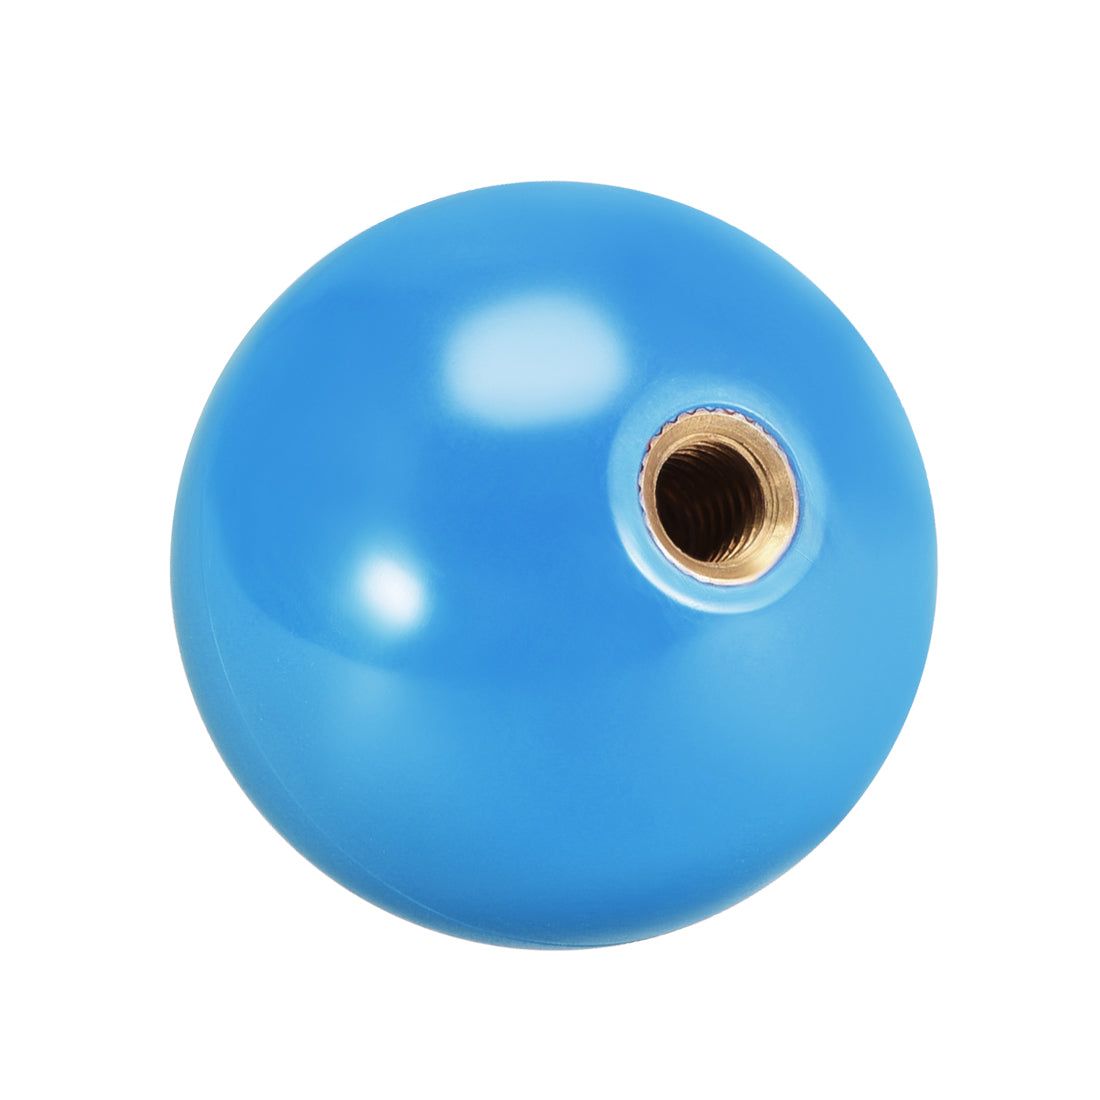 uxcell Uxcell Joystick Ball Top Handle Rocker Round Head Arcade Fighting Game DIY Parts Replacement Blue 2Pcs